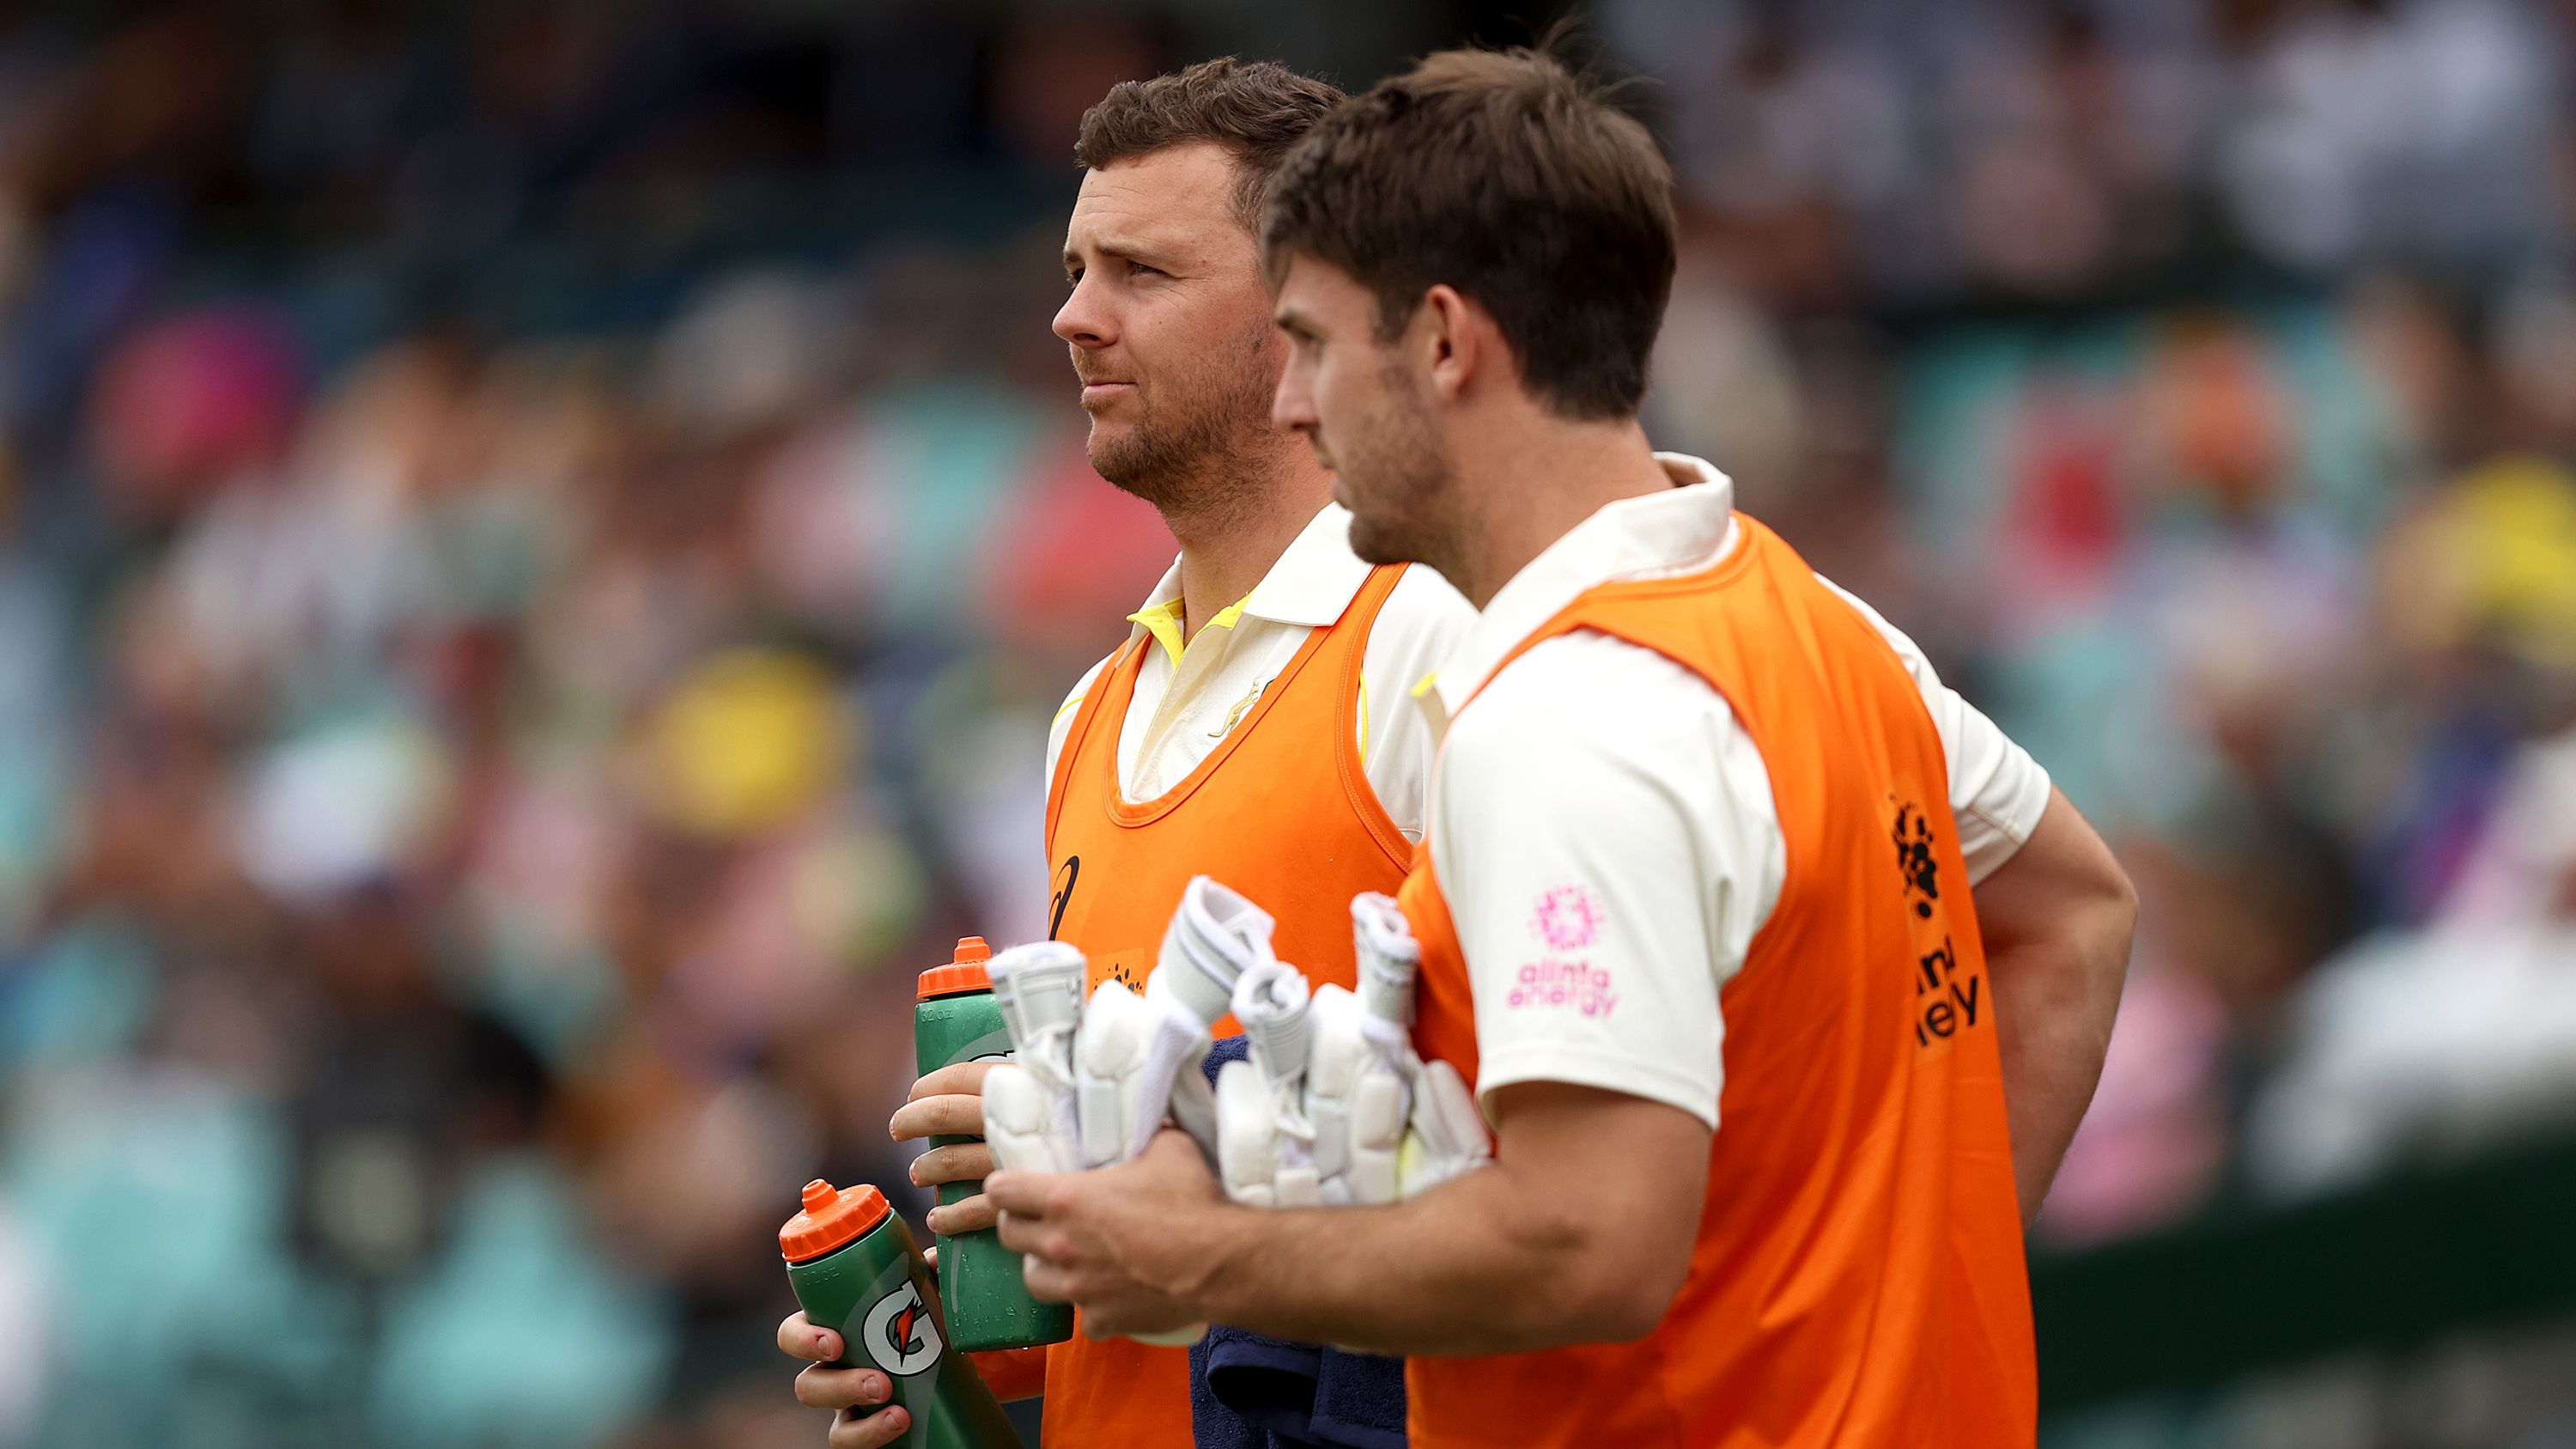 Josh Hazlewood and Mitchell Marsh running water during day one of the Fourth Test Match in the Ashes series.